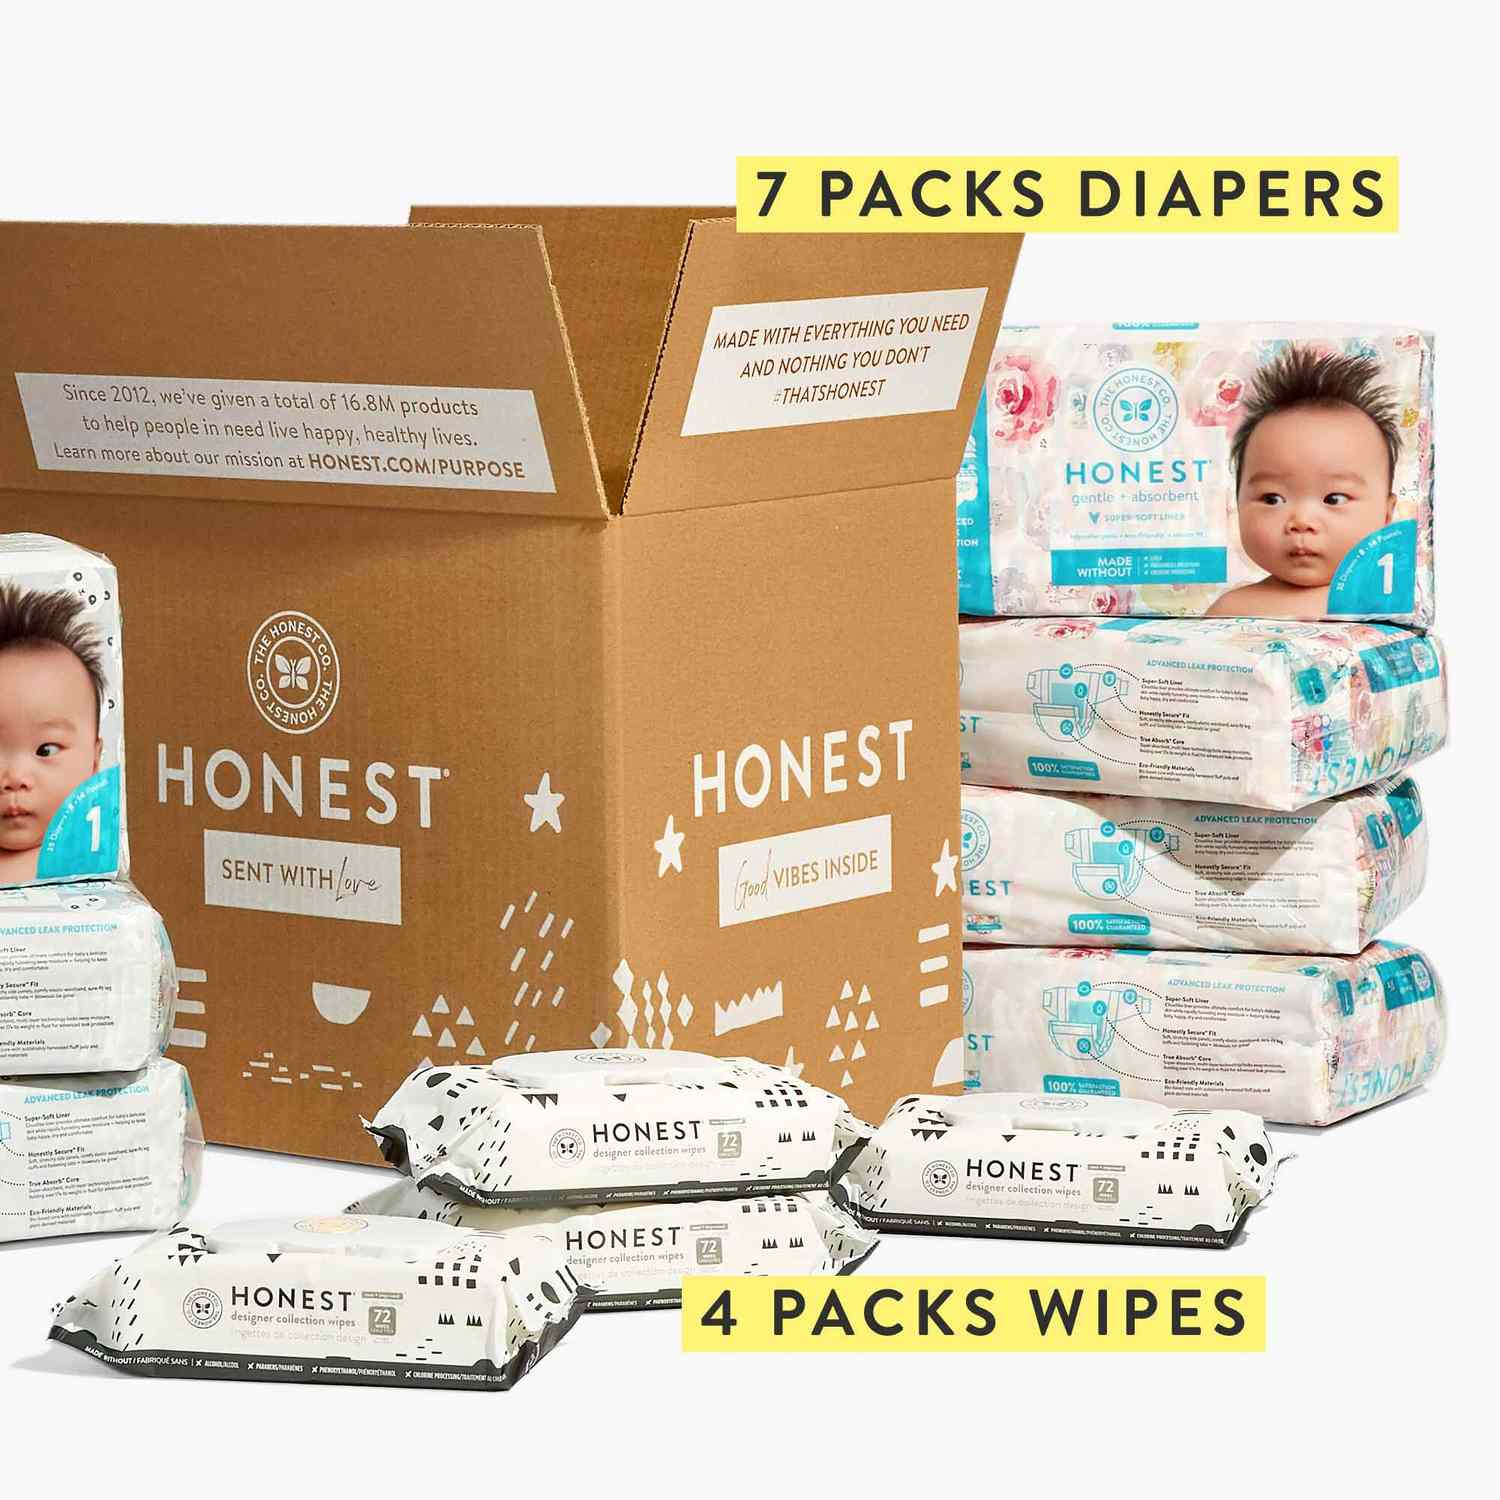 Honest diapers and wipes